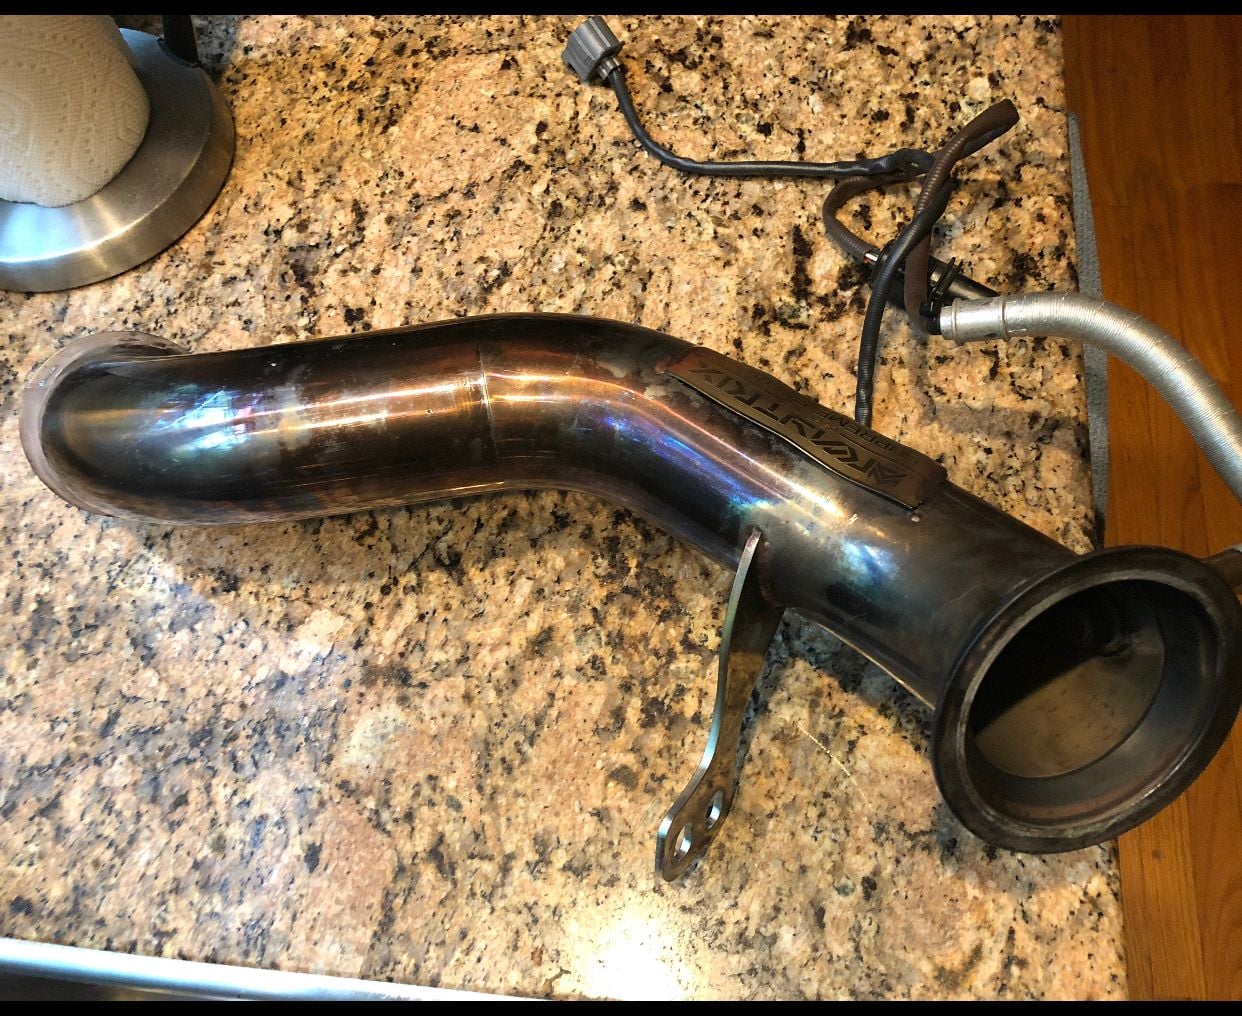 Engine - Exhaust - W205 C300 4MATIC Armytrix Valvetronic Exhaust for sale ! (Full Turbo-back system) - Used - 2015 to 2018 Mercedes-Benz C300 - New Haven, CT 06501, United States